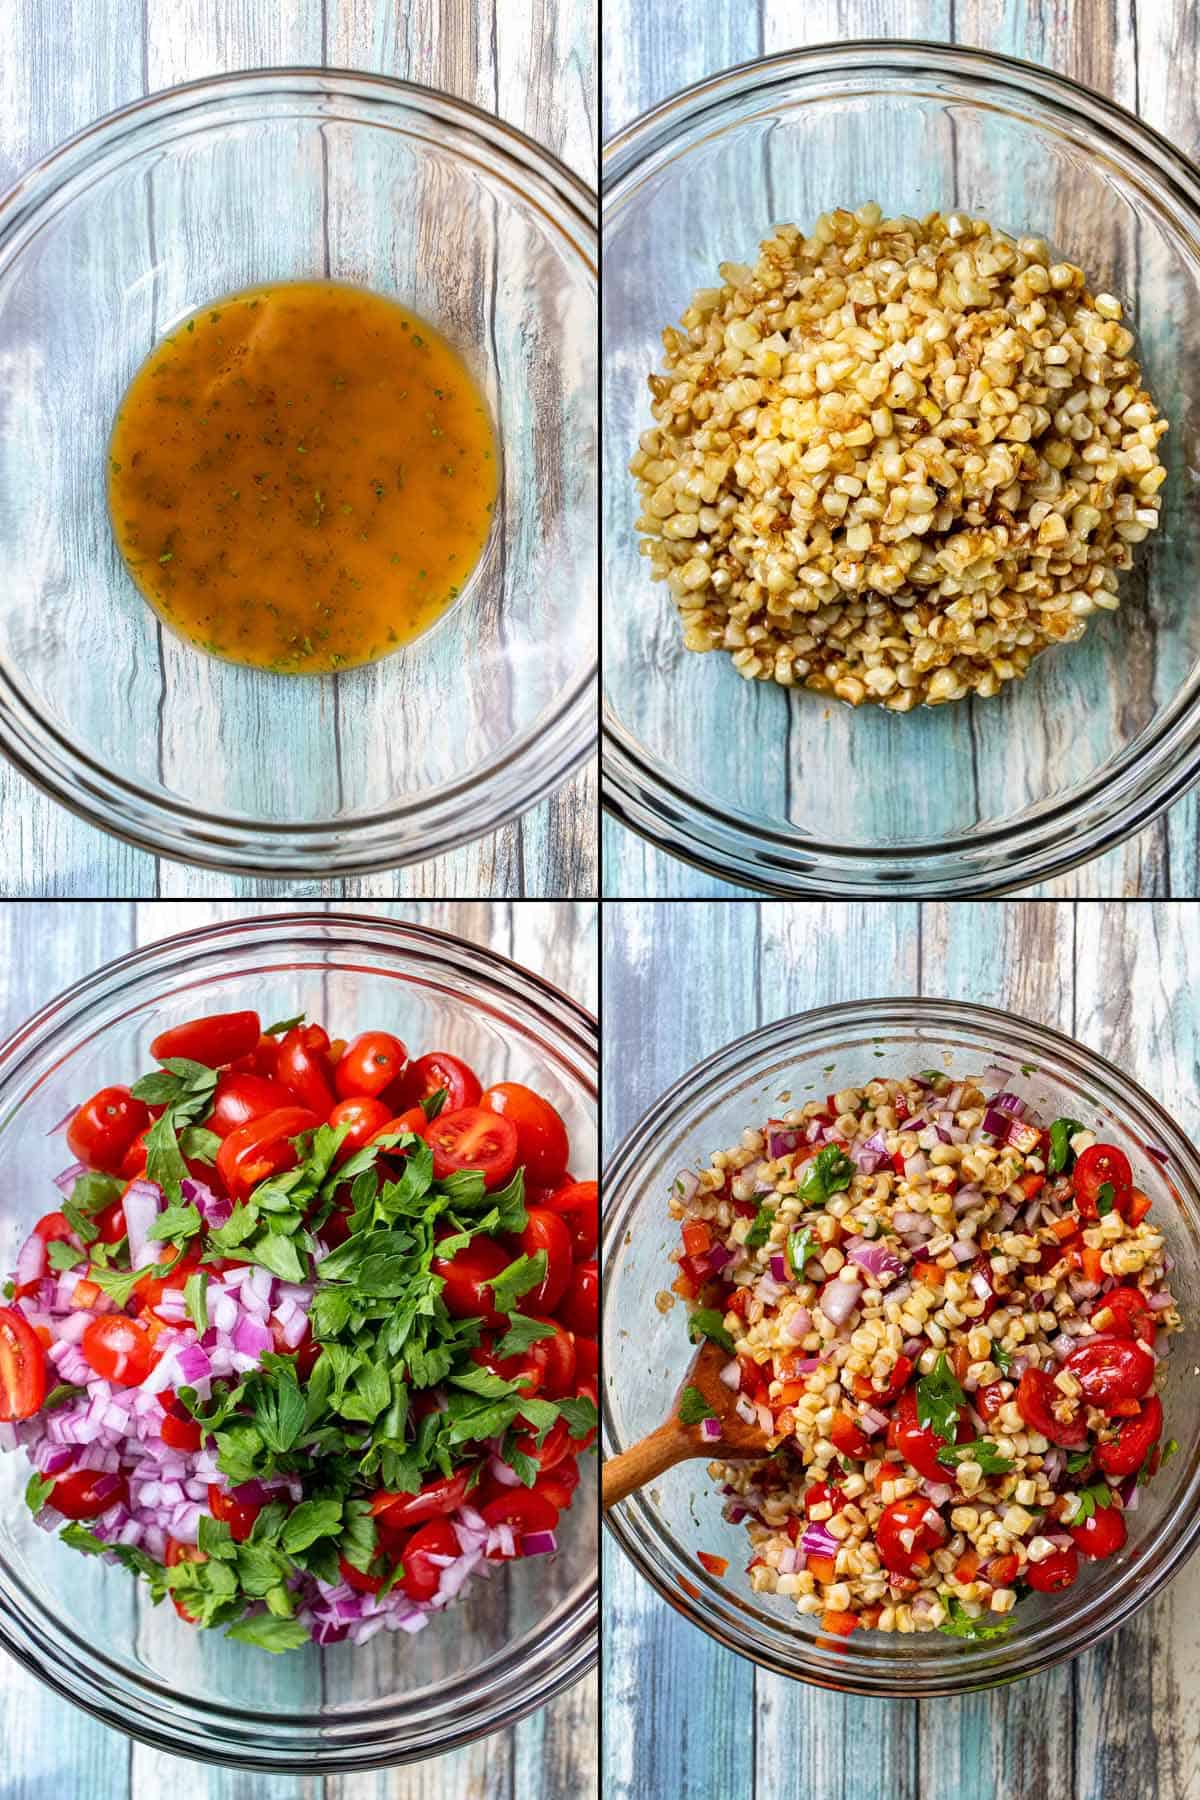 4 images assembling roasted corn salad including adding lime dressing to bowl, adding cooled corn, adding the rest of the vegetables, and stirring together.